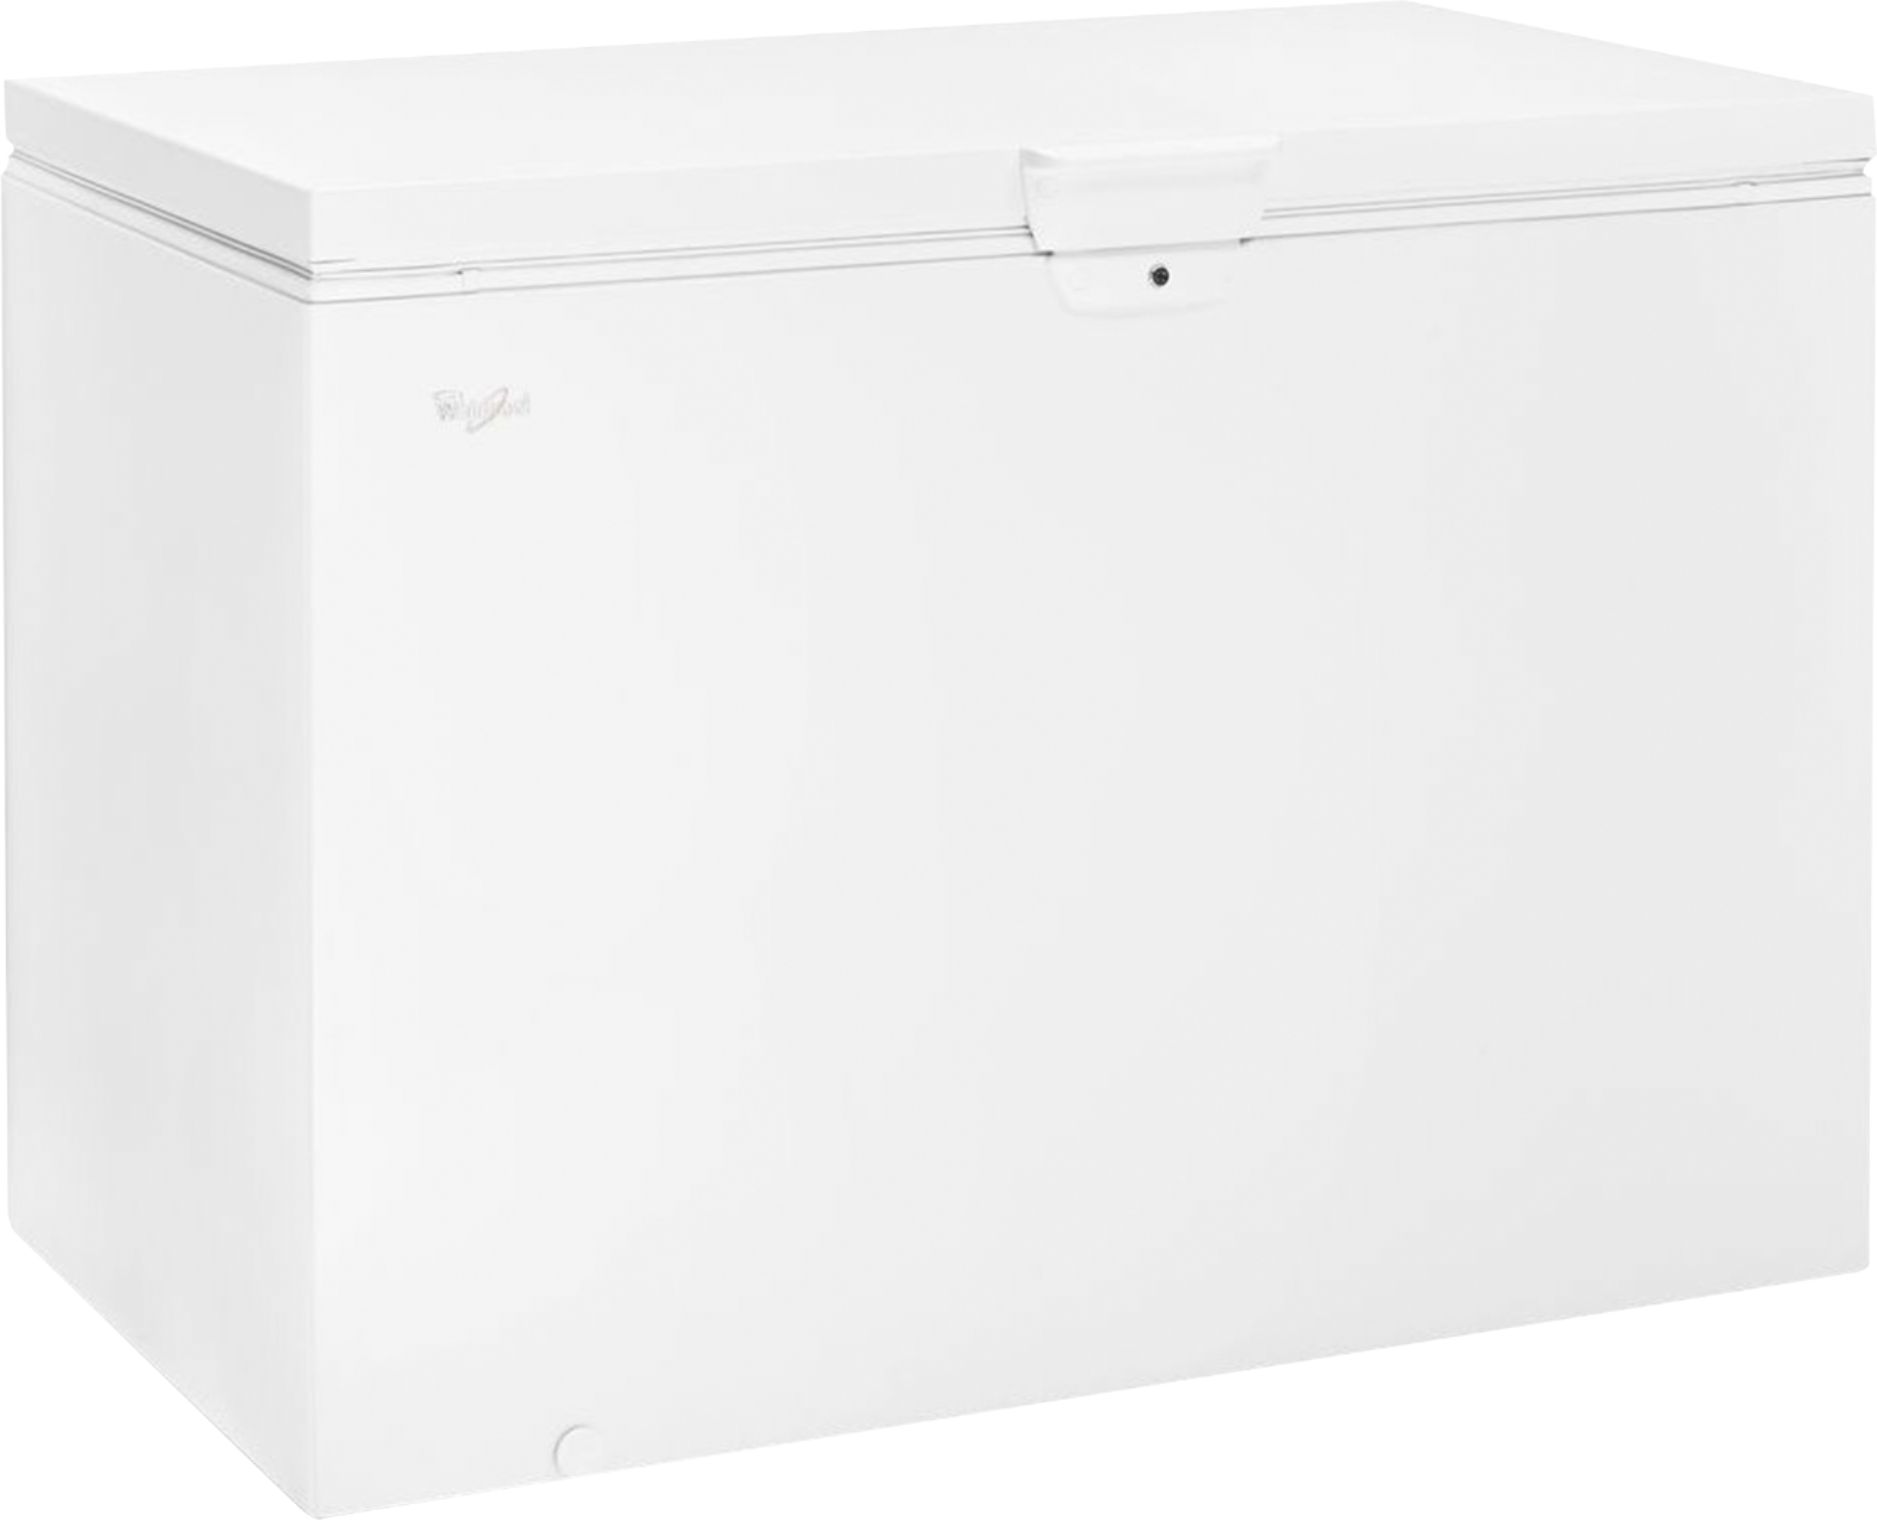 Angle View: Whirlpool - 14.8 Cu. Ft. Chest Freezer - White